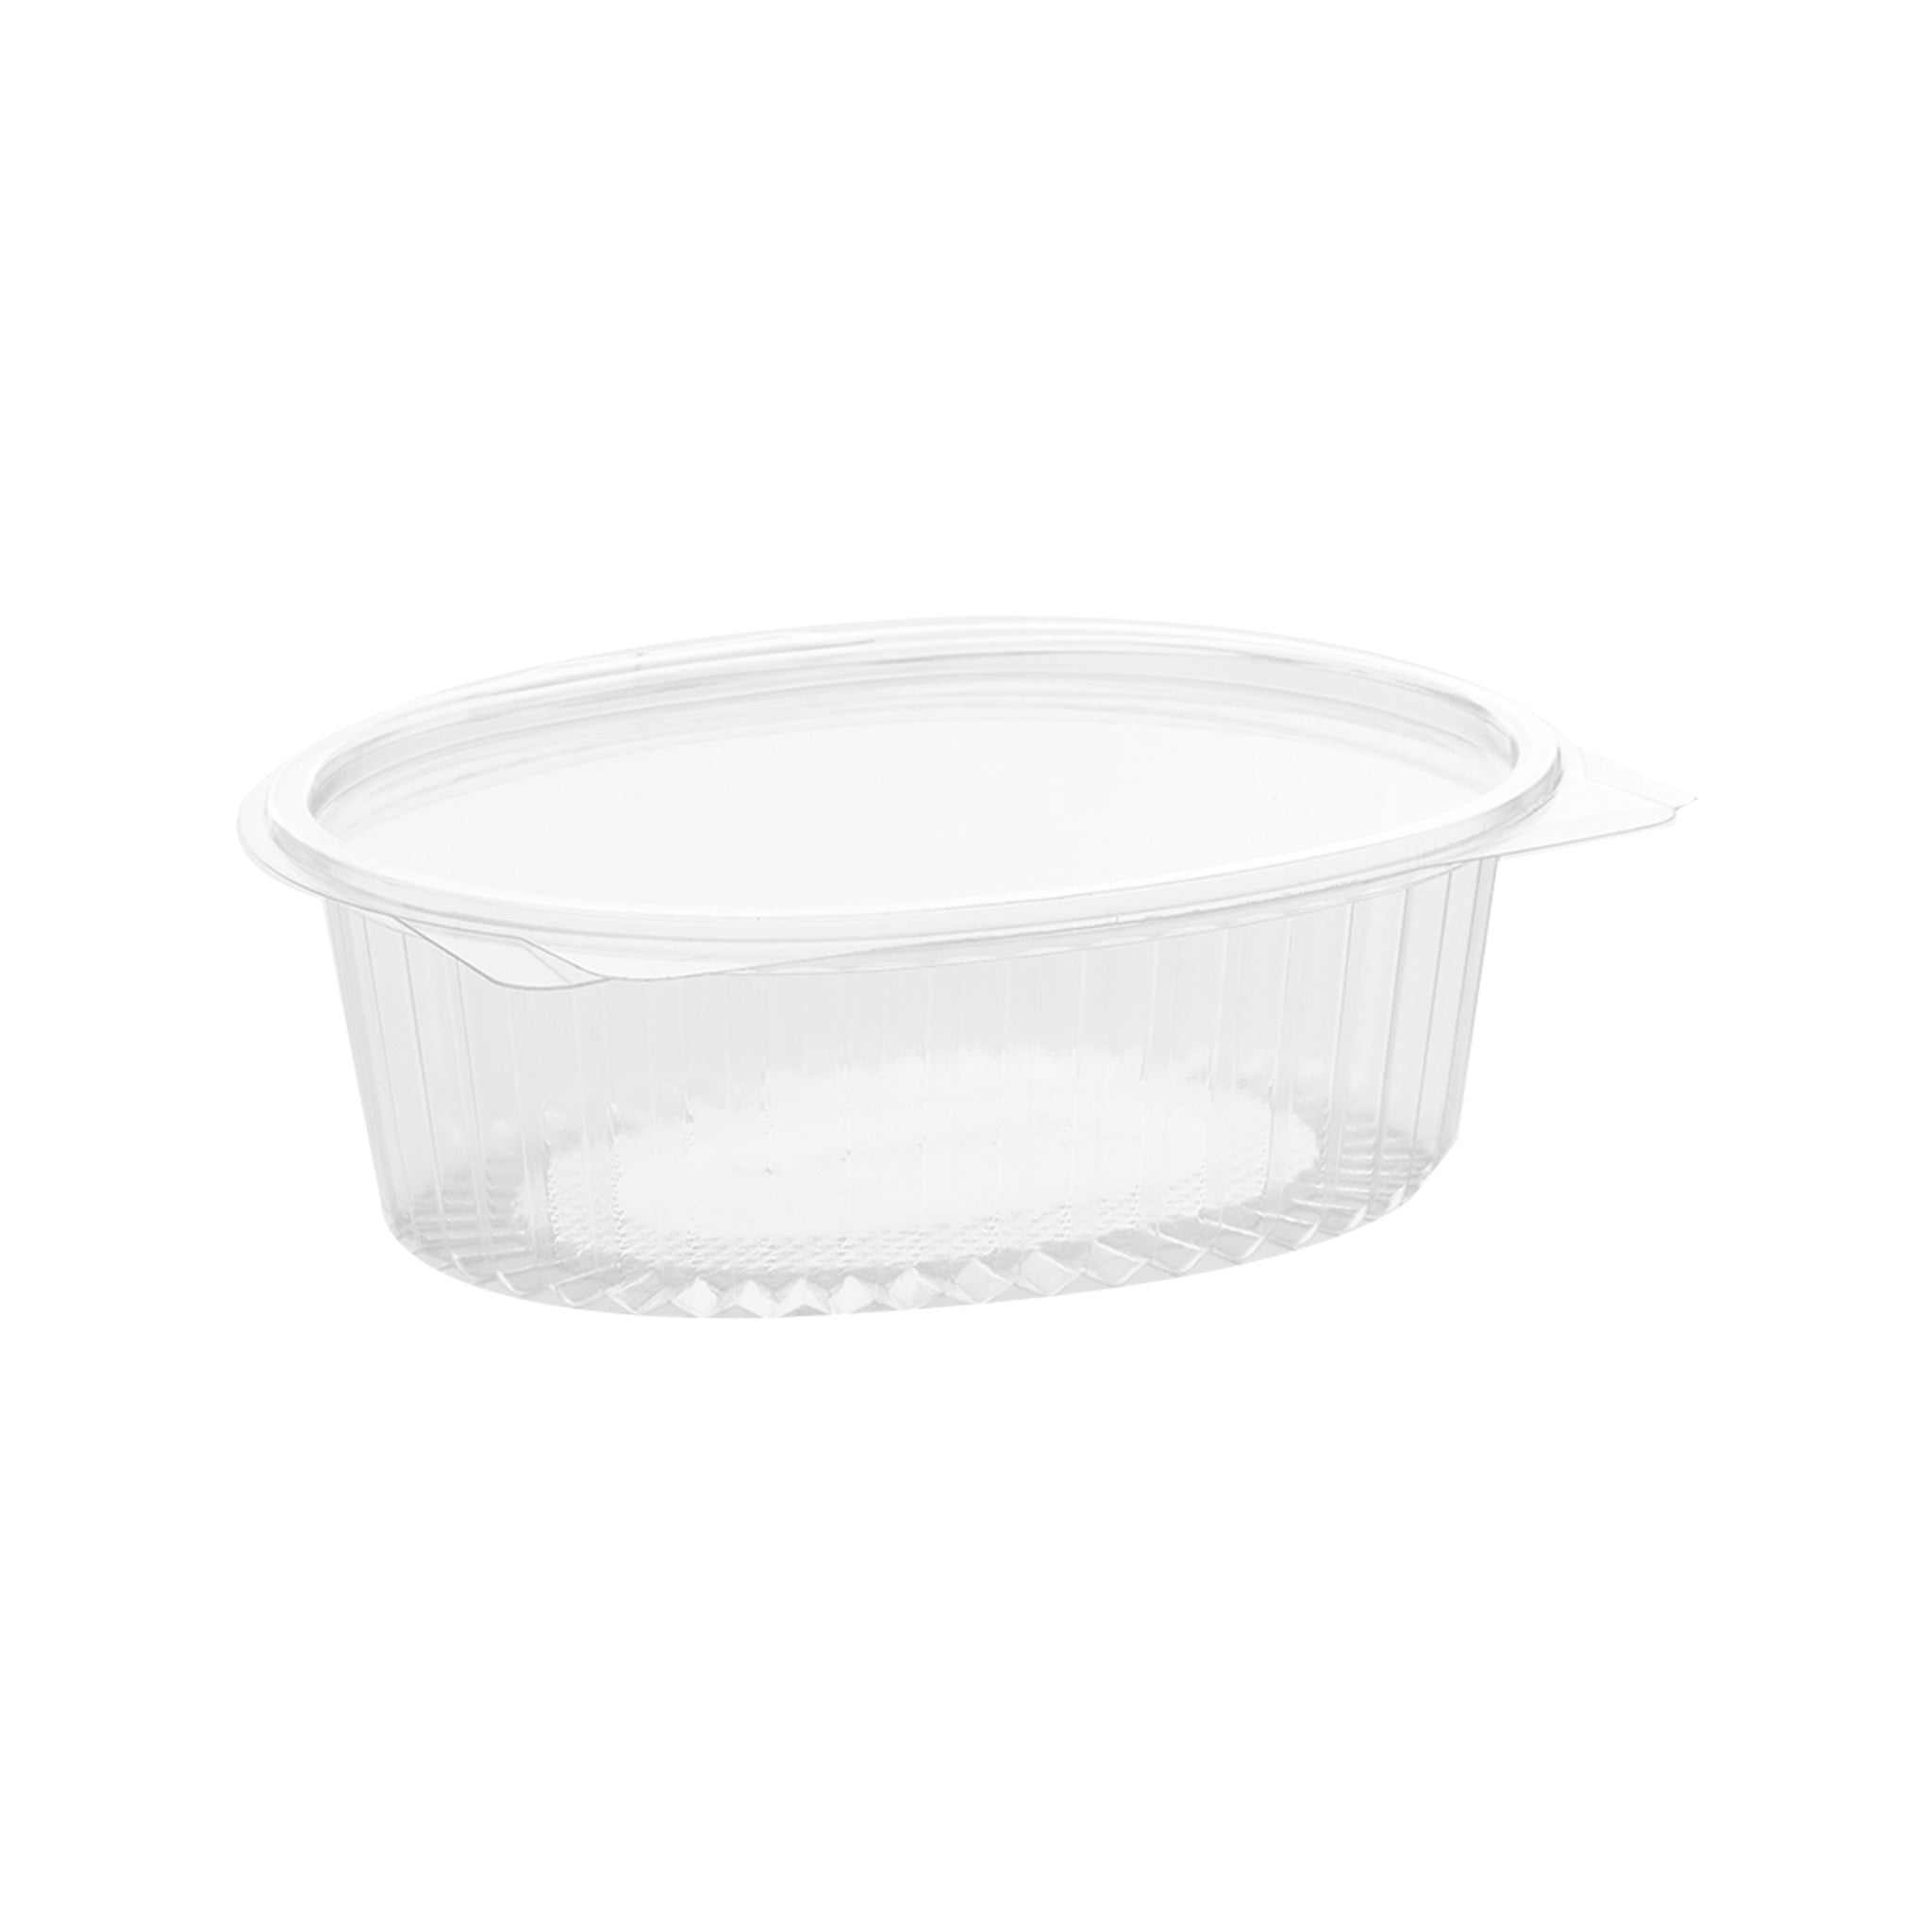 240 Pieces Oval Salad Container,16Oz - Hotpack Bahrain